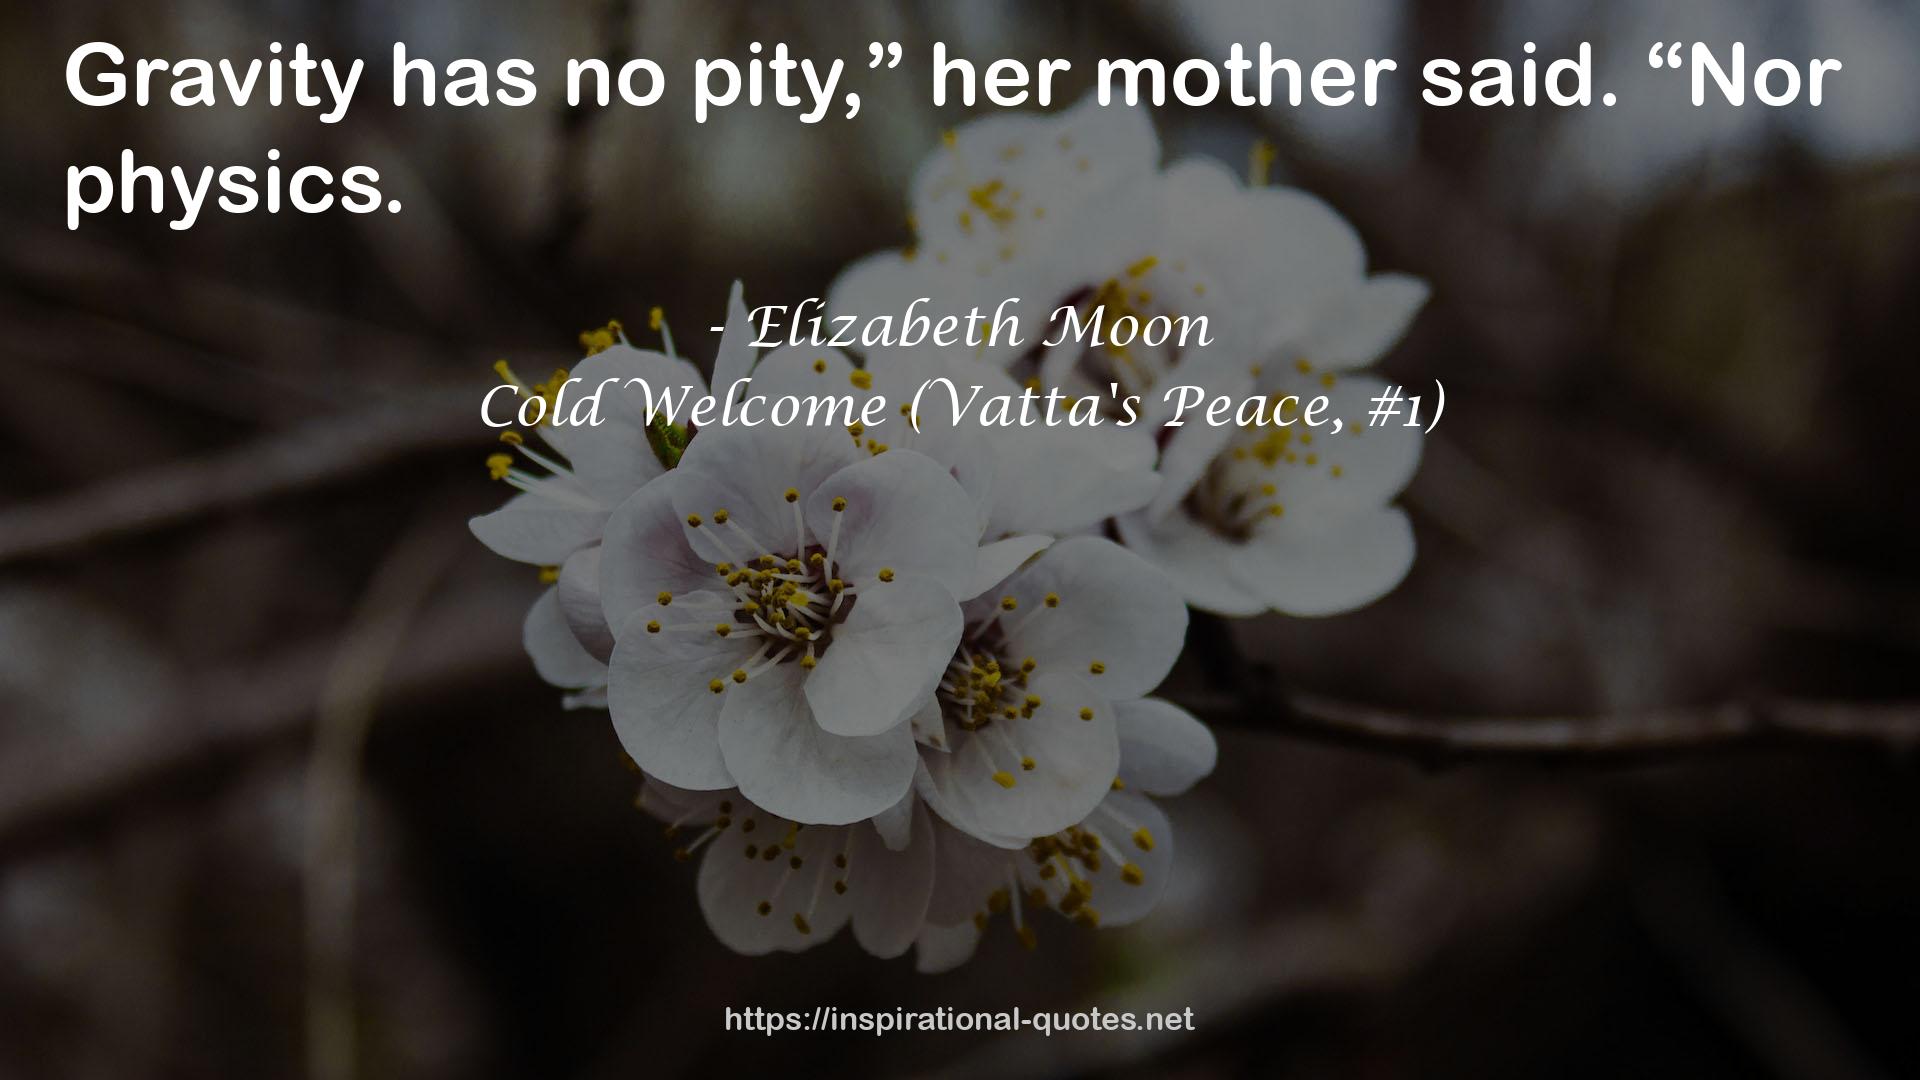 Cold Welcome (Vatta's Peace, #1) QUOTES